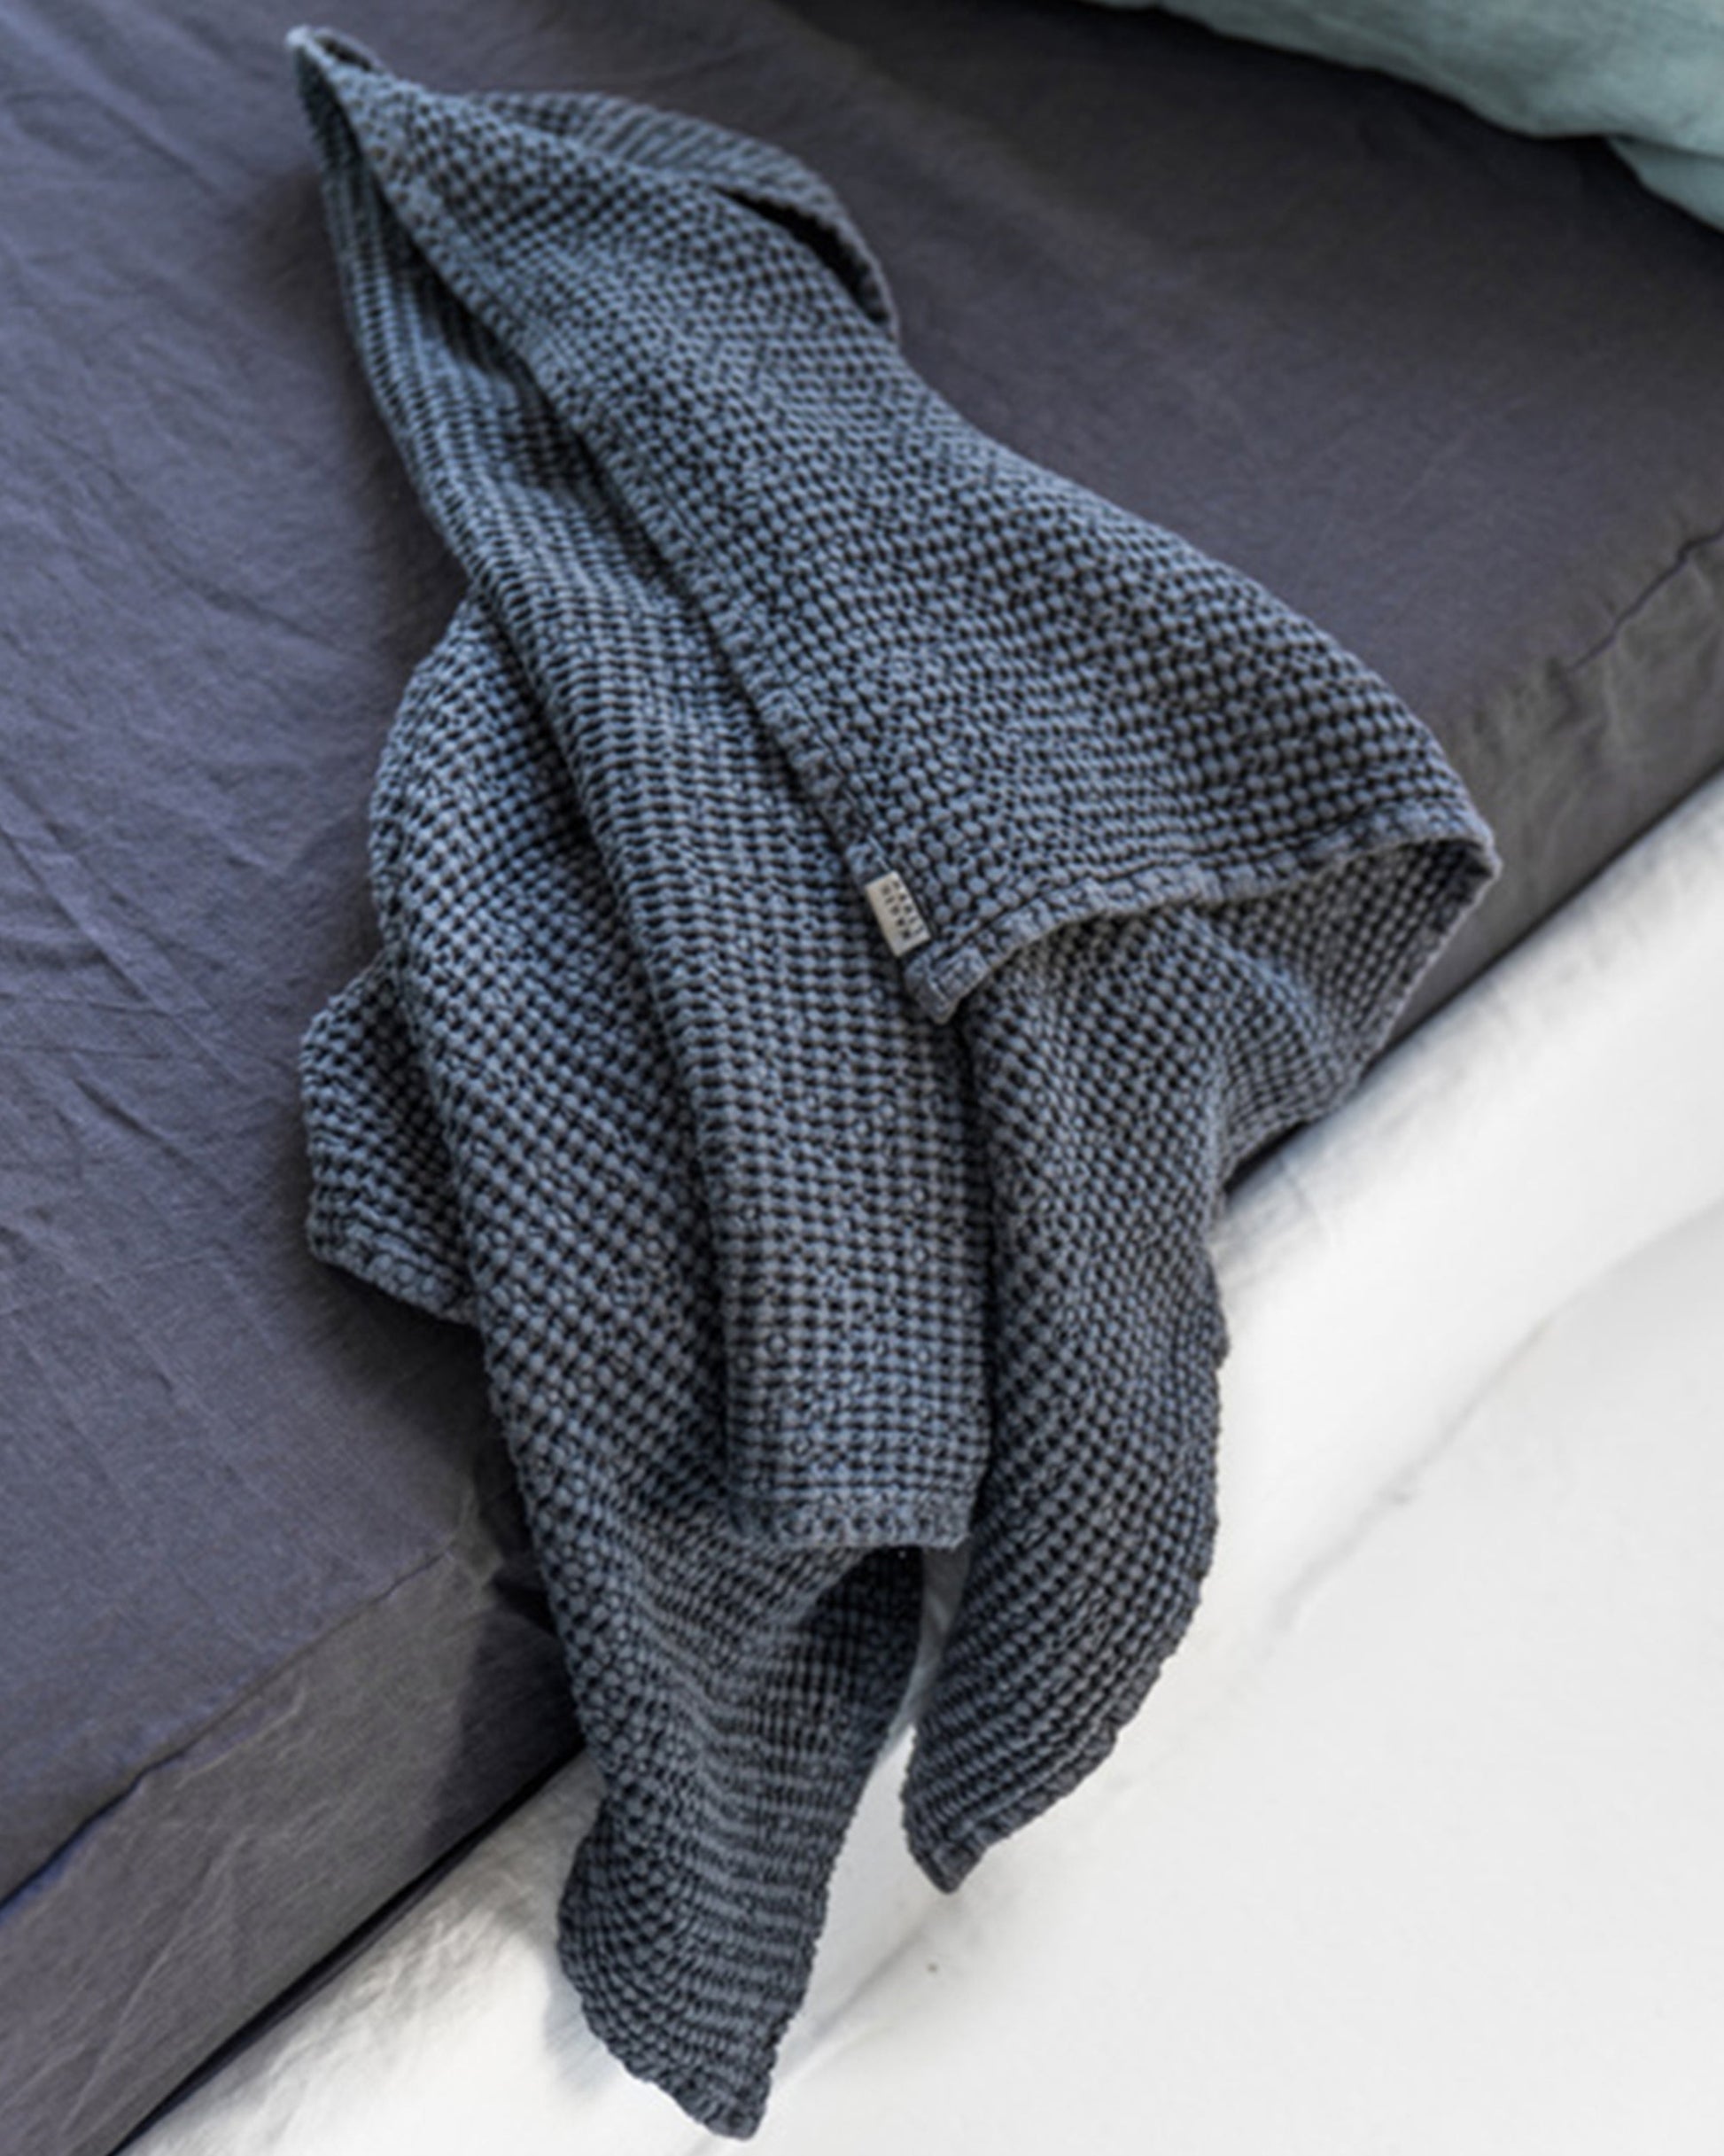 MagicLinen 3-Piece Waffle Towel Set in Dark Gray at Urban Outfitters